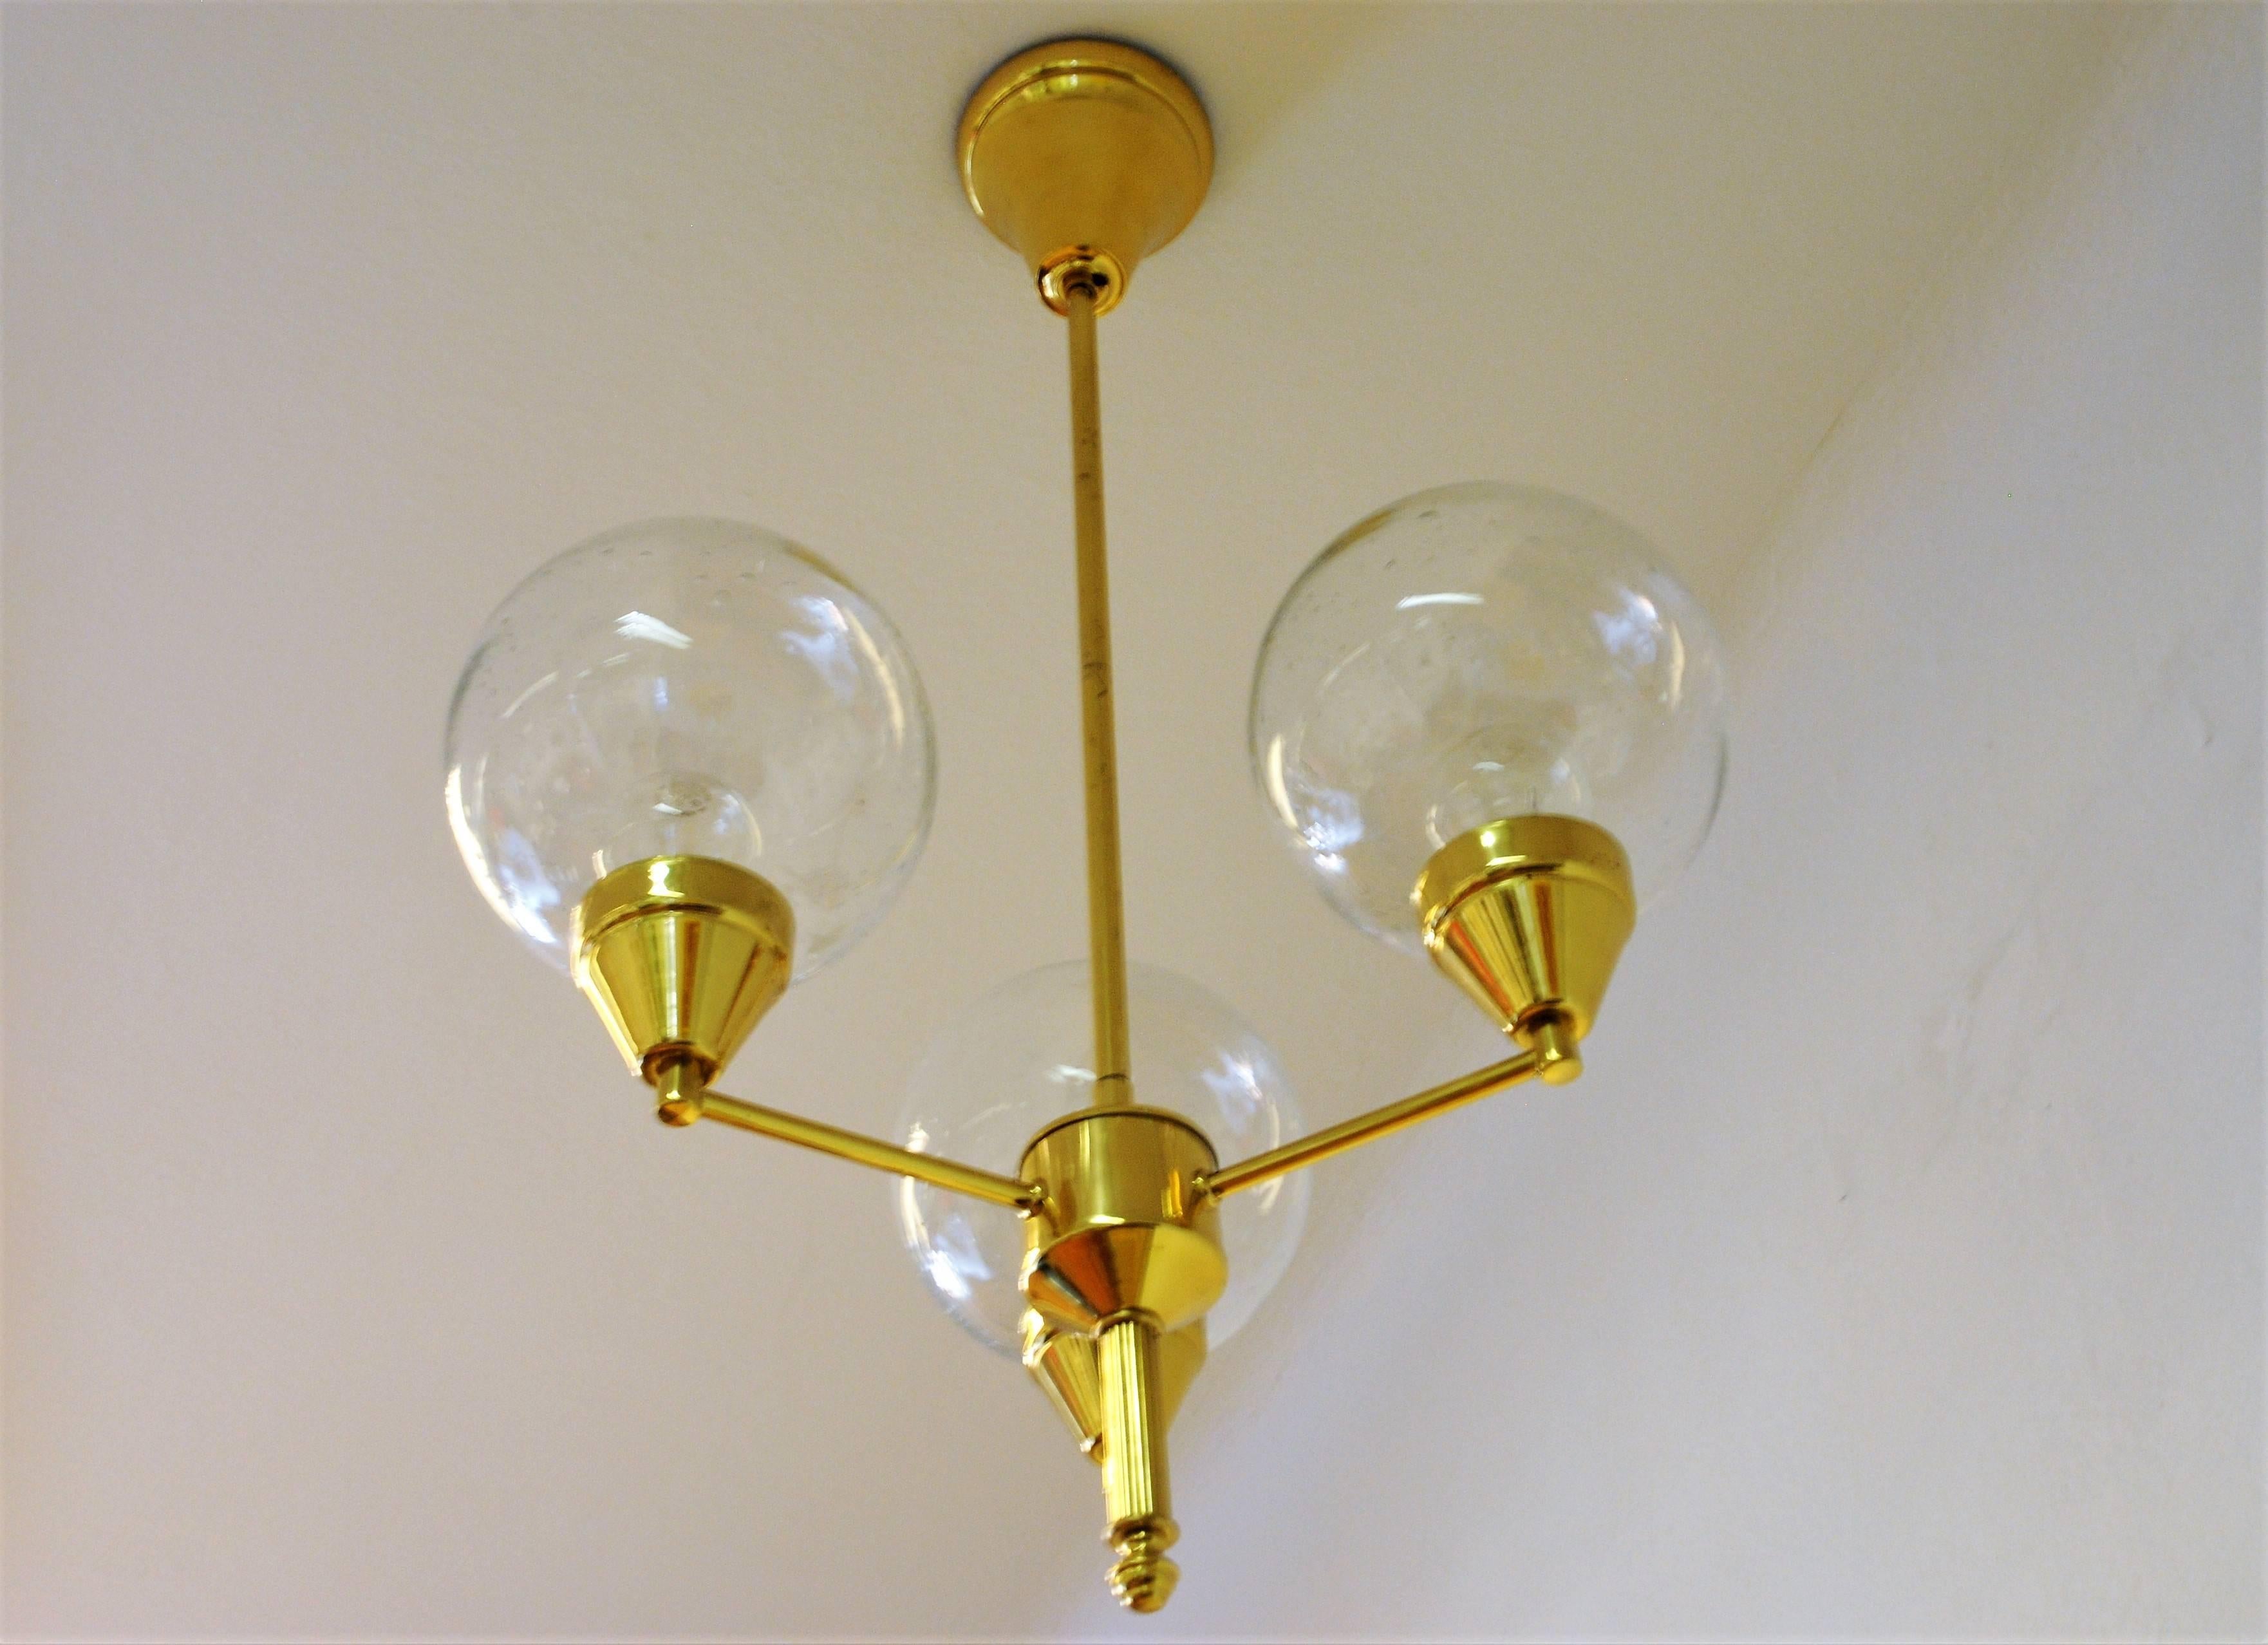 Ceiling lamp of brass and with three clear glass domes in upward position. Probably a Swedish lamp from around the 1960s. The glass domes have small air bubbles. Measure: Diameter of glass dome 16 cm. Nice and neat lamp.